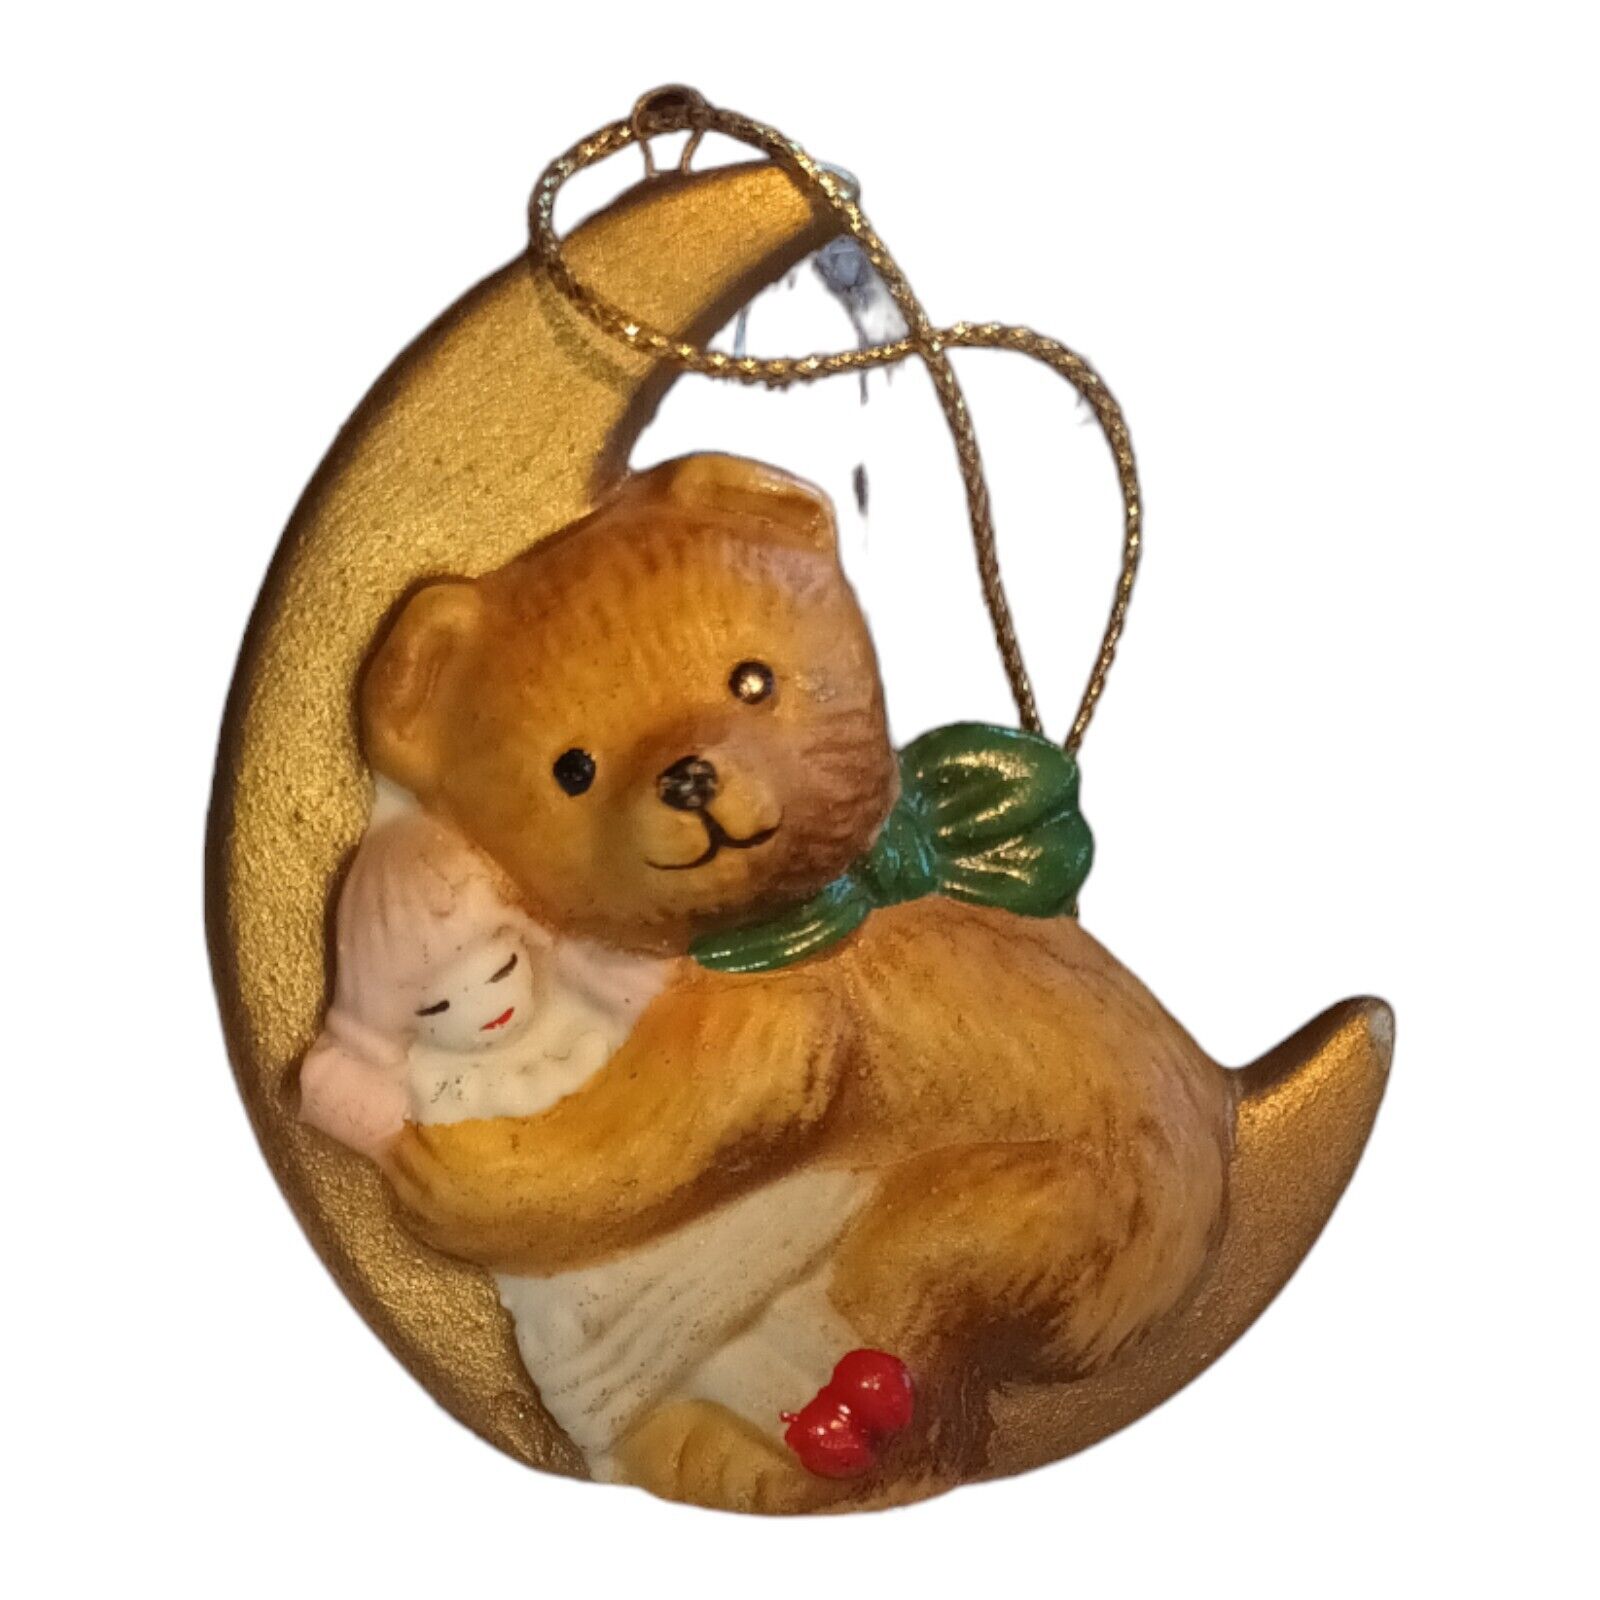 VINTAGE CERAMIC BEAR HUGGING CRESCENT MOON WITH DOLL 2.75” ORNAMENT TAIWAN